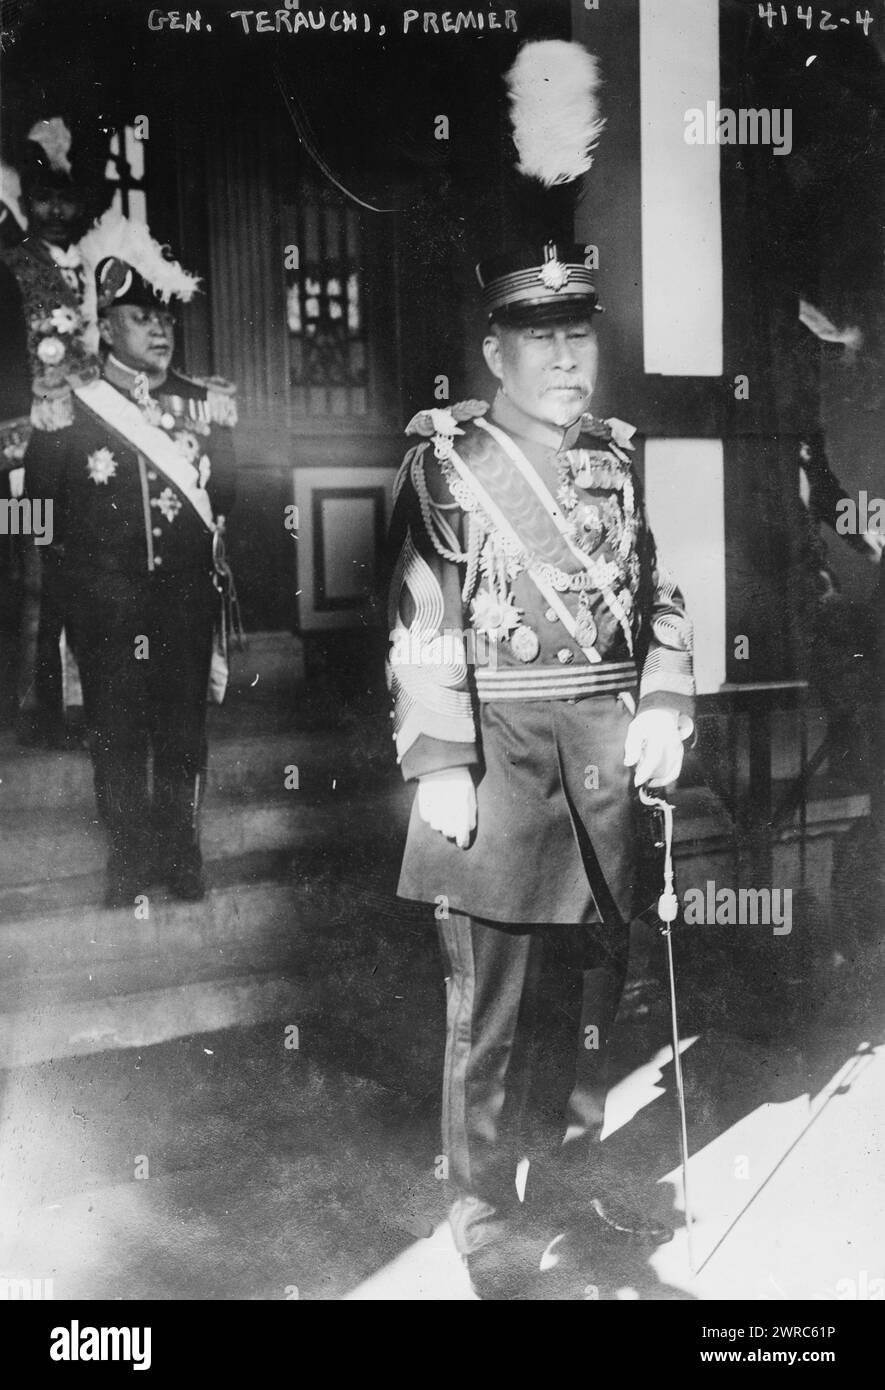 Gen. Terauchi, Premier, Photograph shows politician and officer Count Terauchi Masatake (1852-1919) who was a Gensui (Marshal) in the Imperial Japanese Army and served as Prime Minister (1916-1918)., between ca. 1915 and ca. 1920, Glass negatives, 1 negative: glass Stock Photo